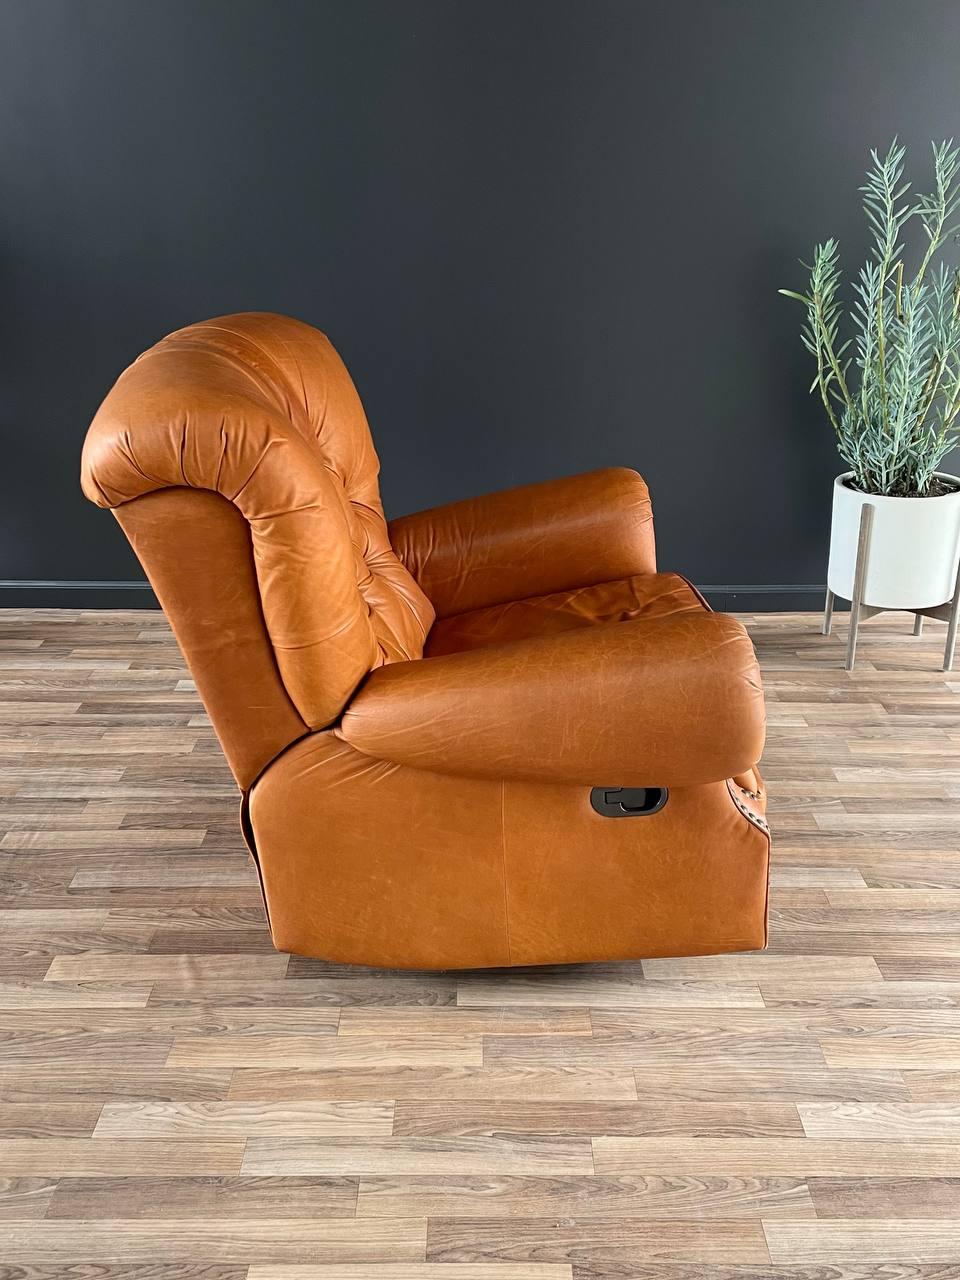 Late 20th Century English Chesterfield Style Italian Leather Reclining Lounge Chair